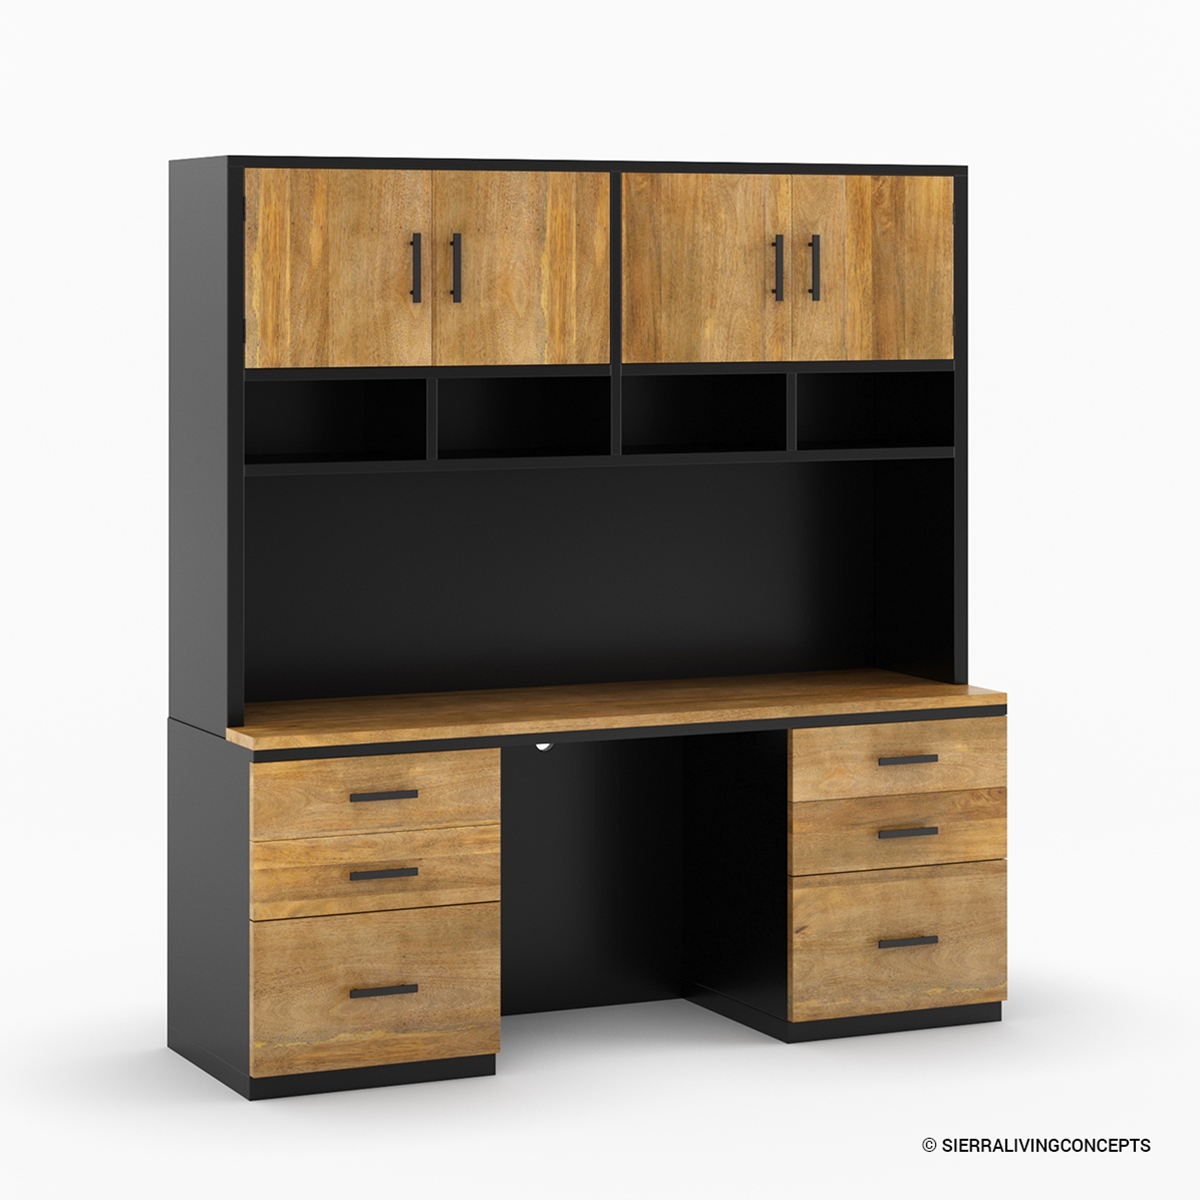 https://www.sierralivingconcepts.com/images/thumbs/0412560_kristiansand-solid-wood-high-storage-home-office-desk-with-hutch.jpeg